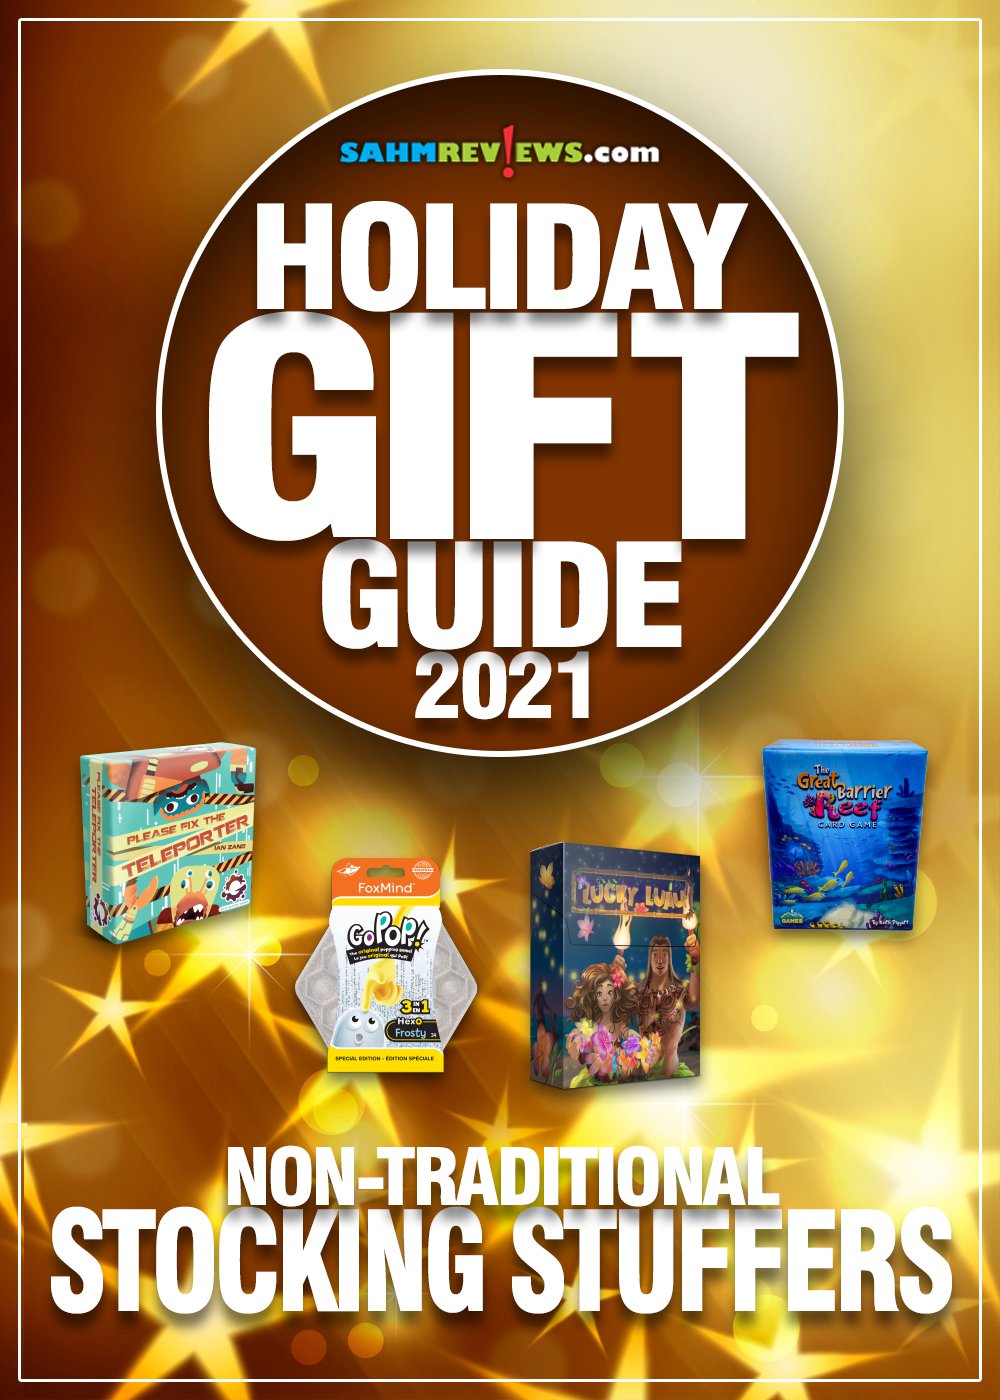 Stocking stuffers don't have to be candy and sweets. Be creative with these inexpensive game and toy ideas in our Holiday Gift Guide! - SahmReviews.com